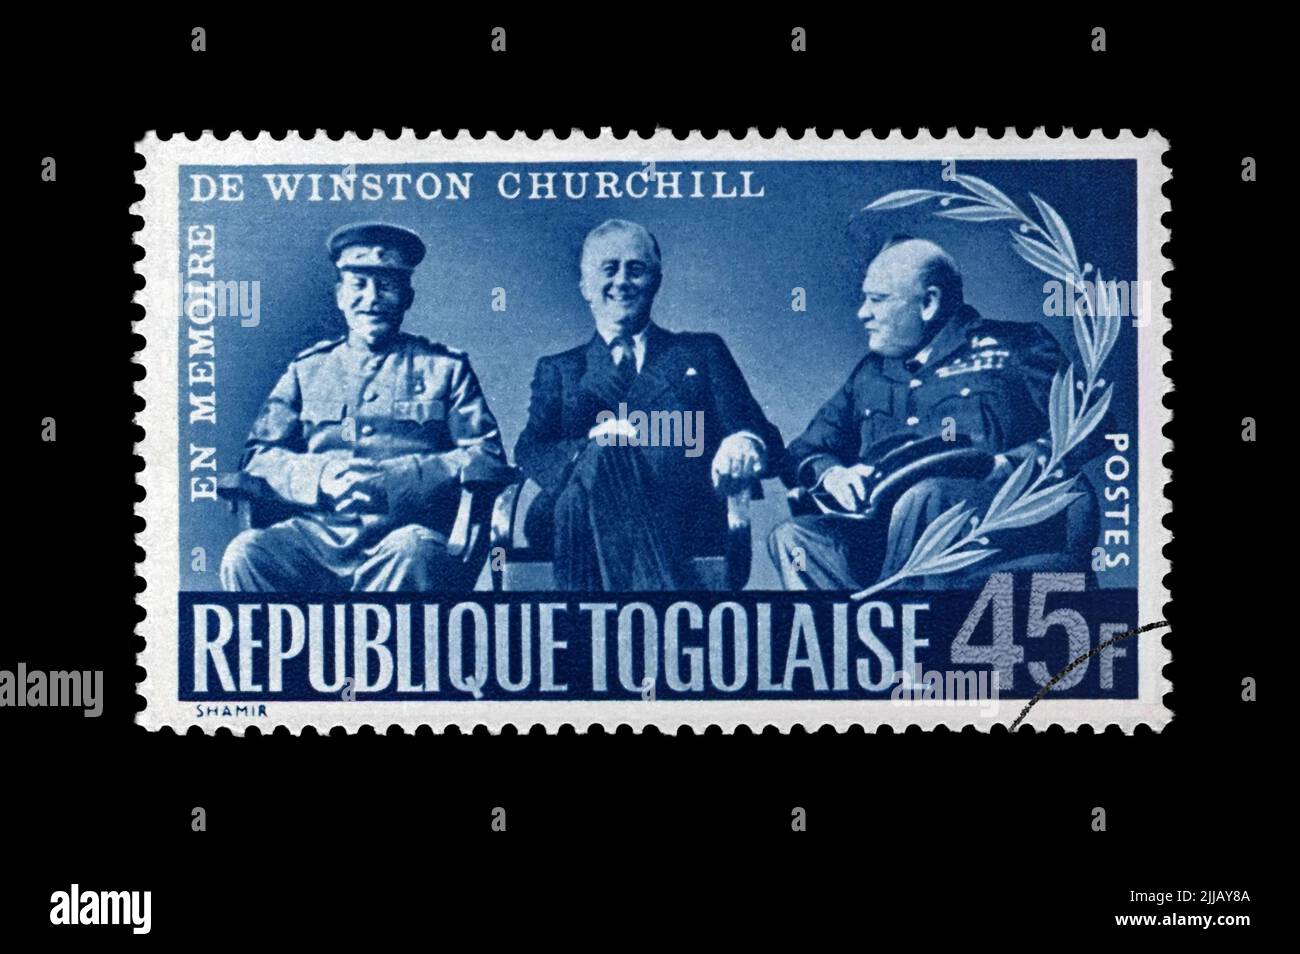 Stalin, Roosevelt and Churchill. Yalta conference during World War II. cancelled vintage postal stamp printed in Togo, circa 1965. Stock Photo